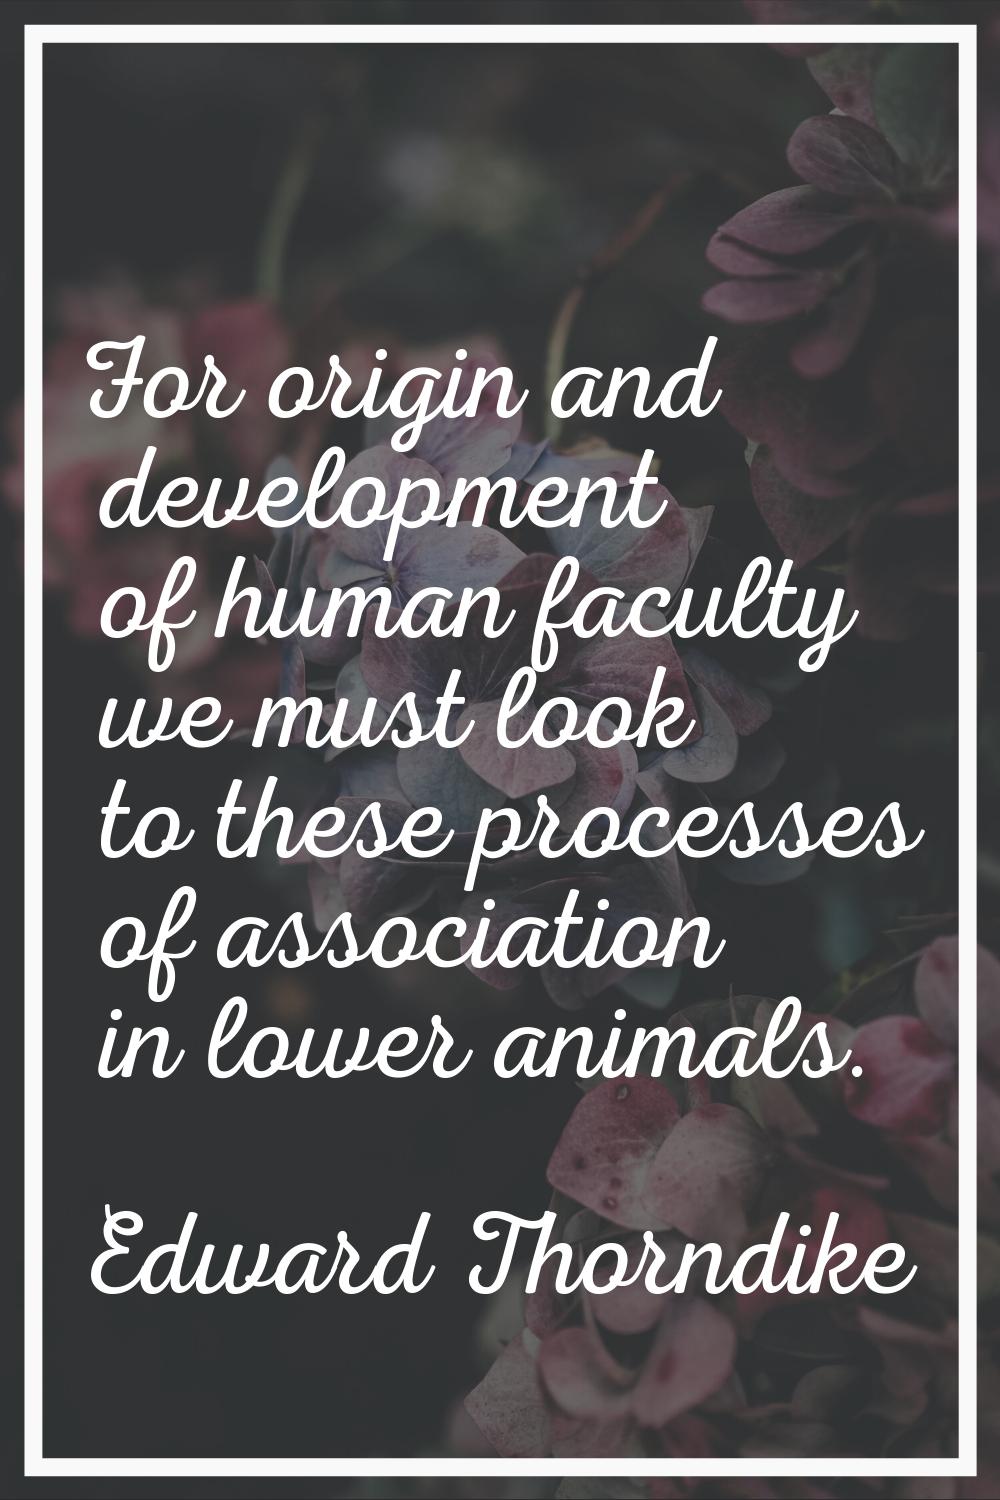 For origin and development of human faculty we must look to these processes of association in lower